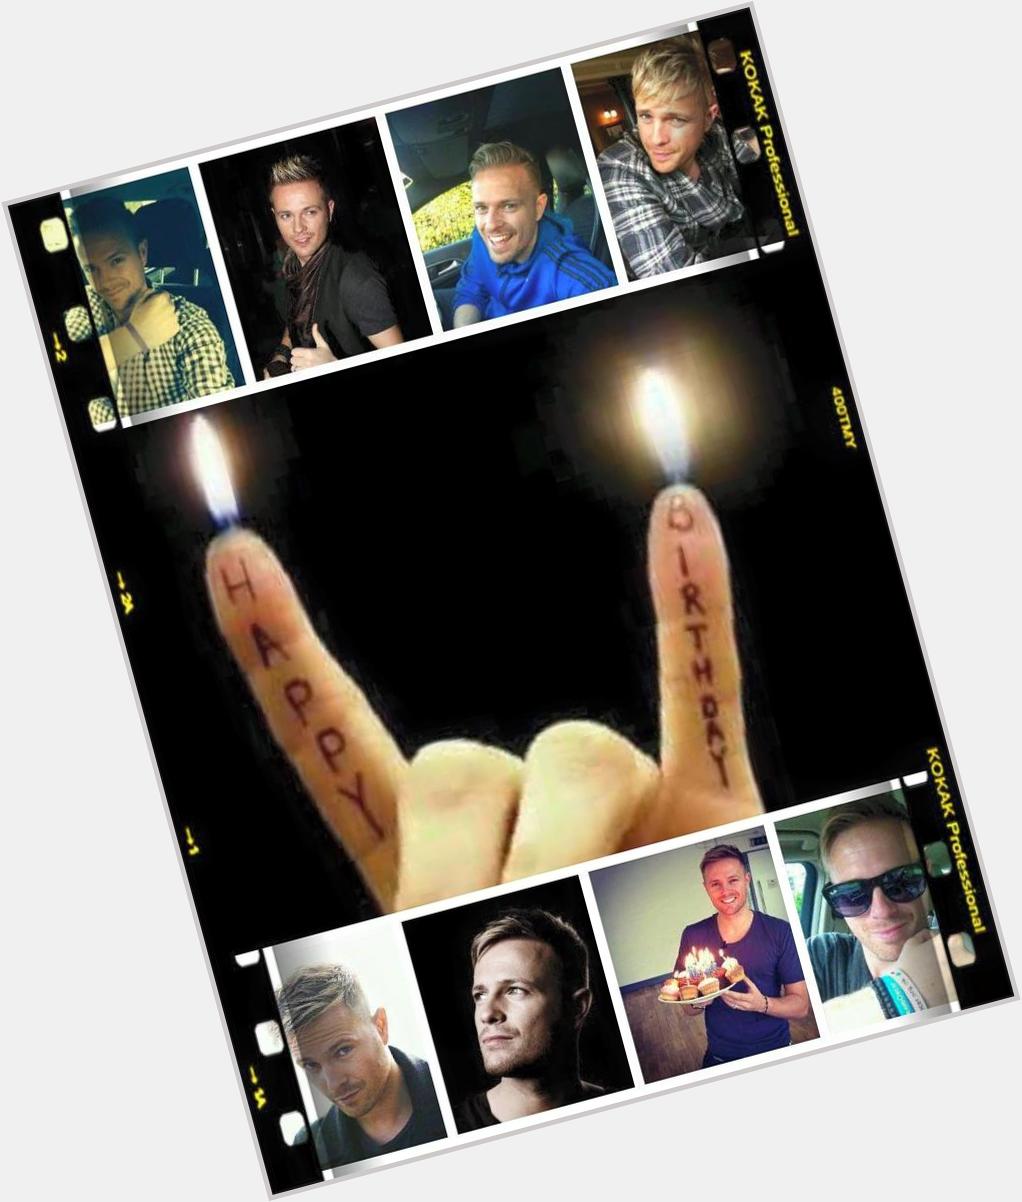  happy birthday nicky byrne have lot of fans.. from indonesia 